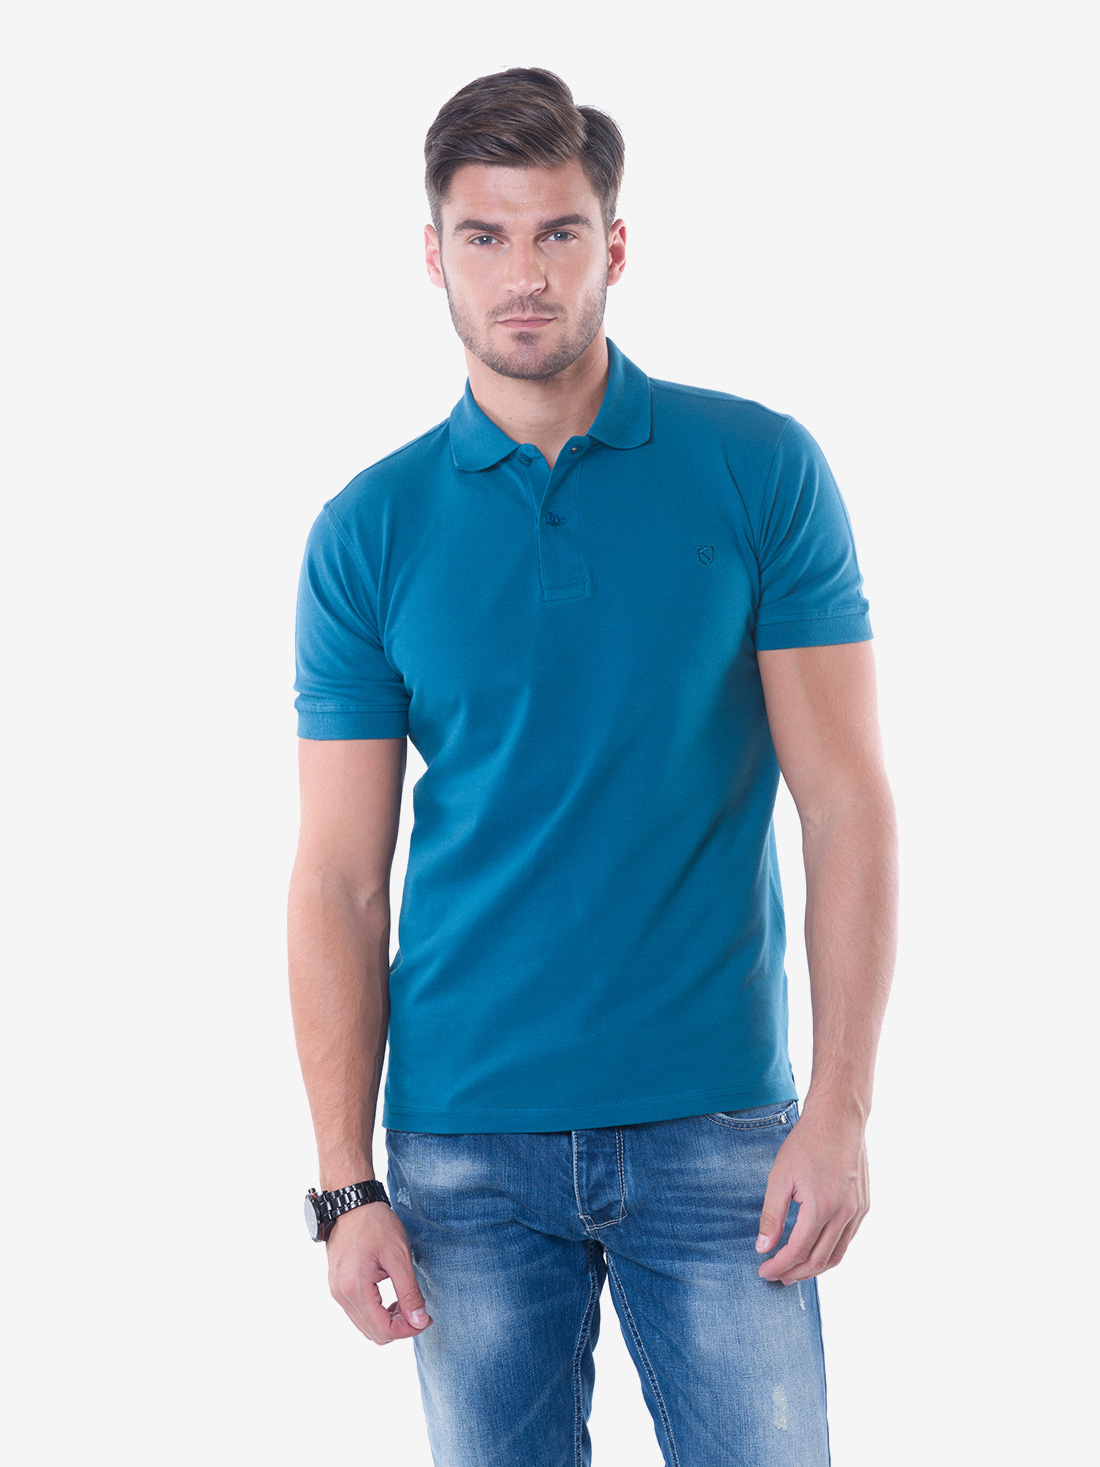 Kal Jacobs Classic Fit Turkish Teal Polo Shirt